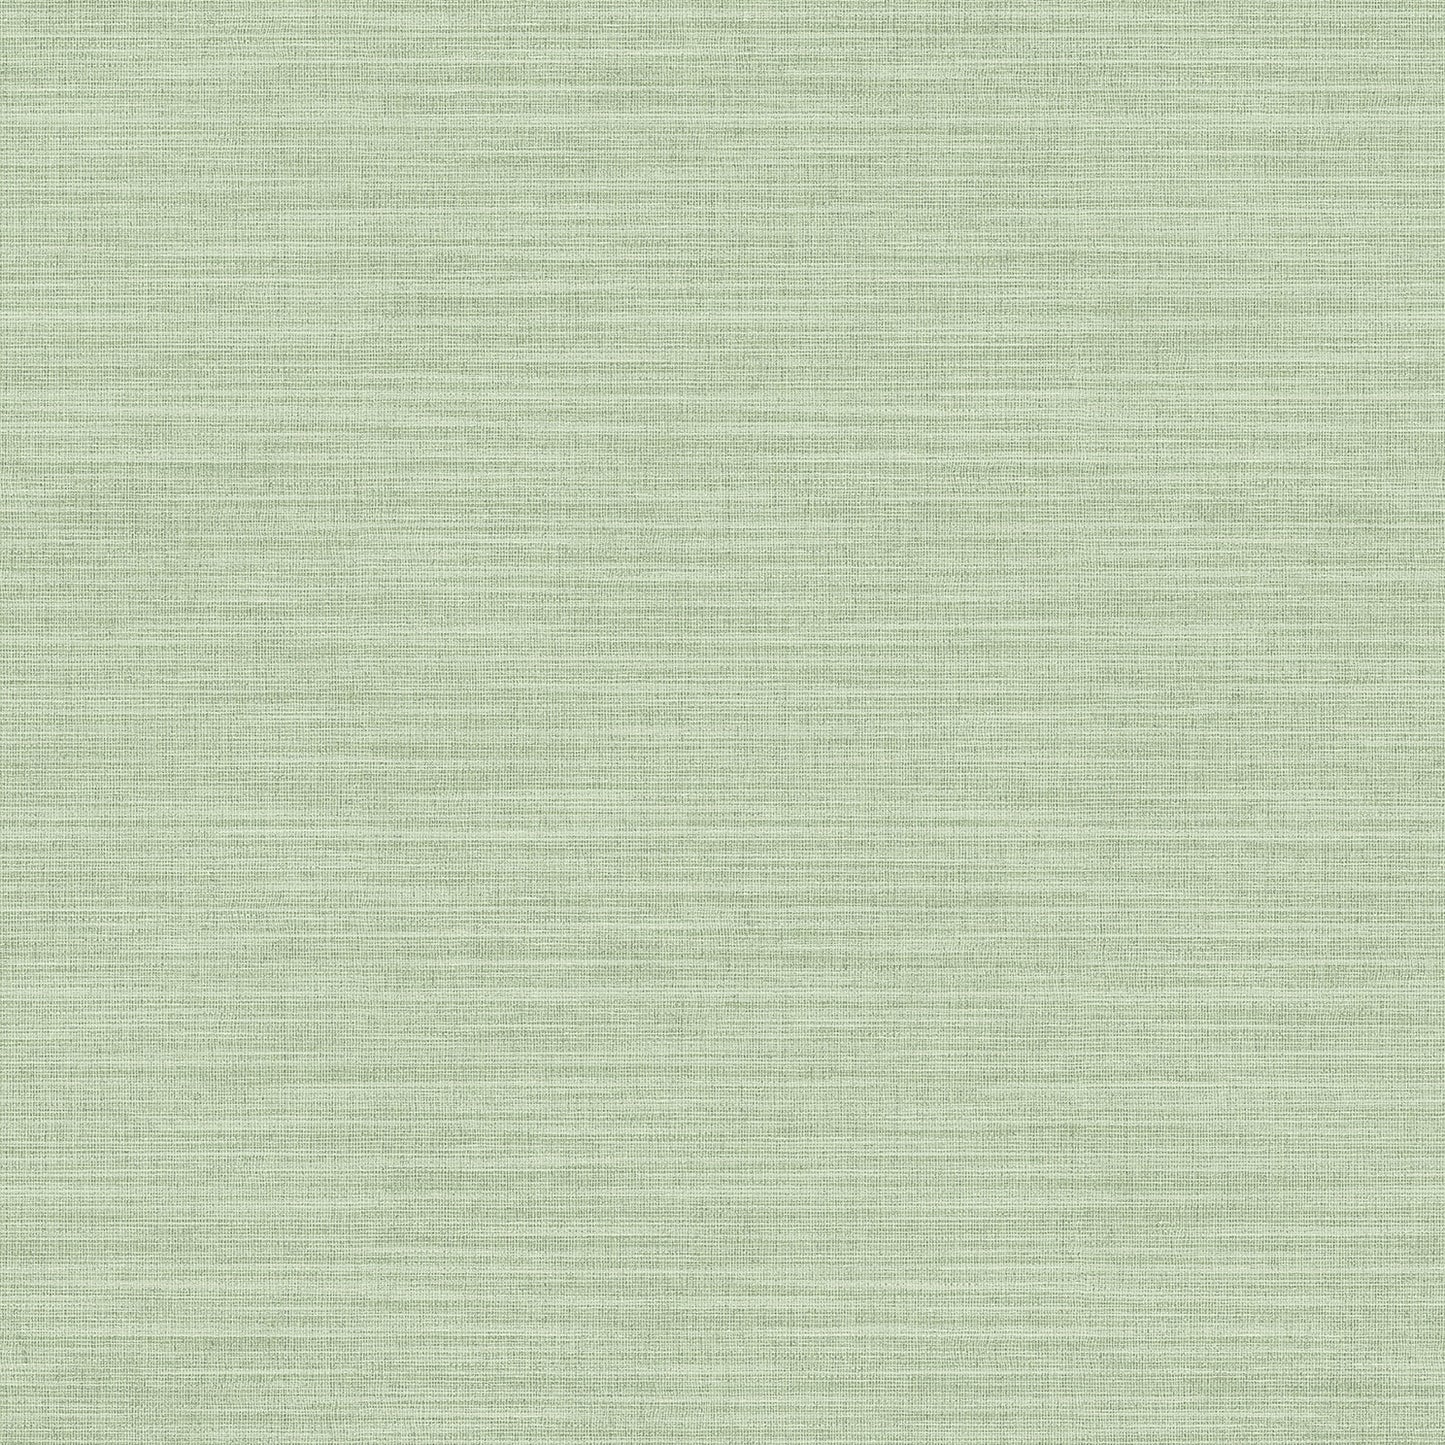 Find 2813-MKE-3126 Kitchen Greens Fabric Textures Wallpaper by Advantage